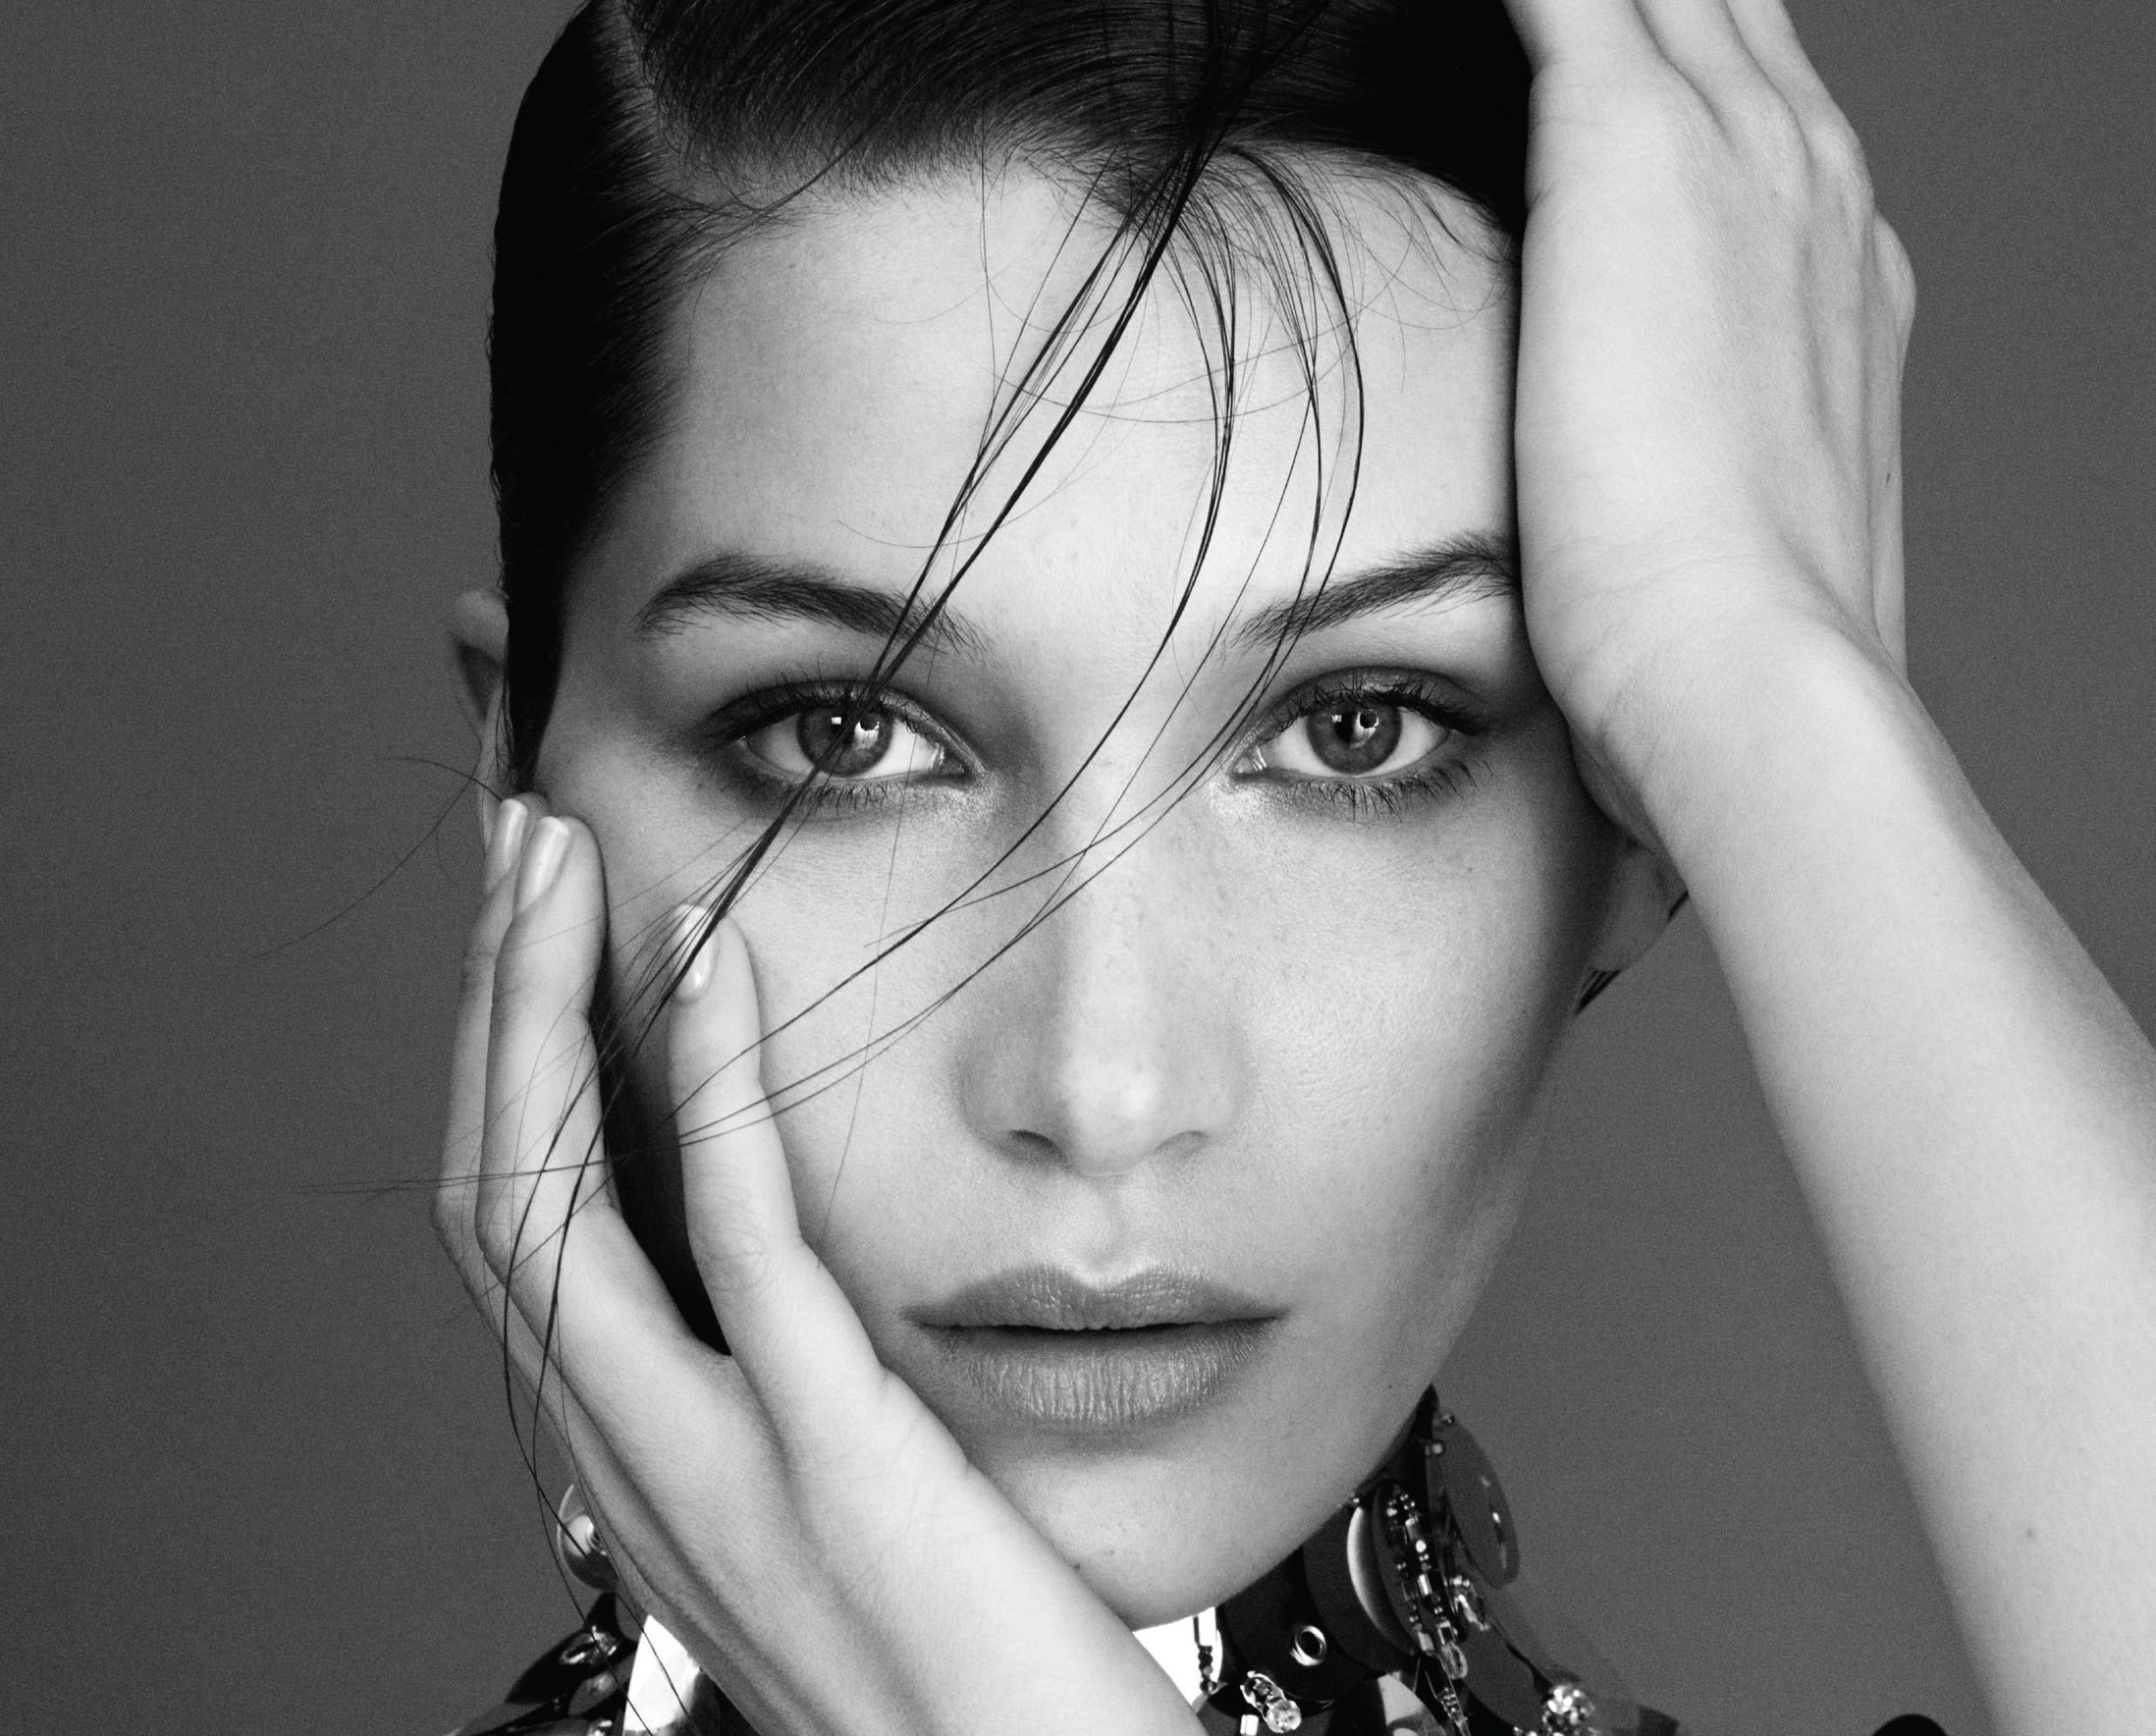 bella hadid, black and white, model, face portrait, hands, Girls